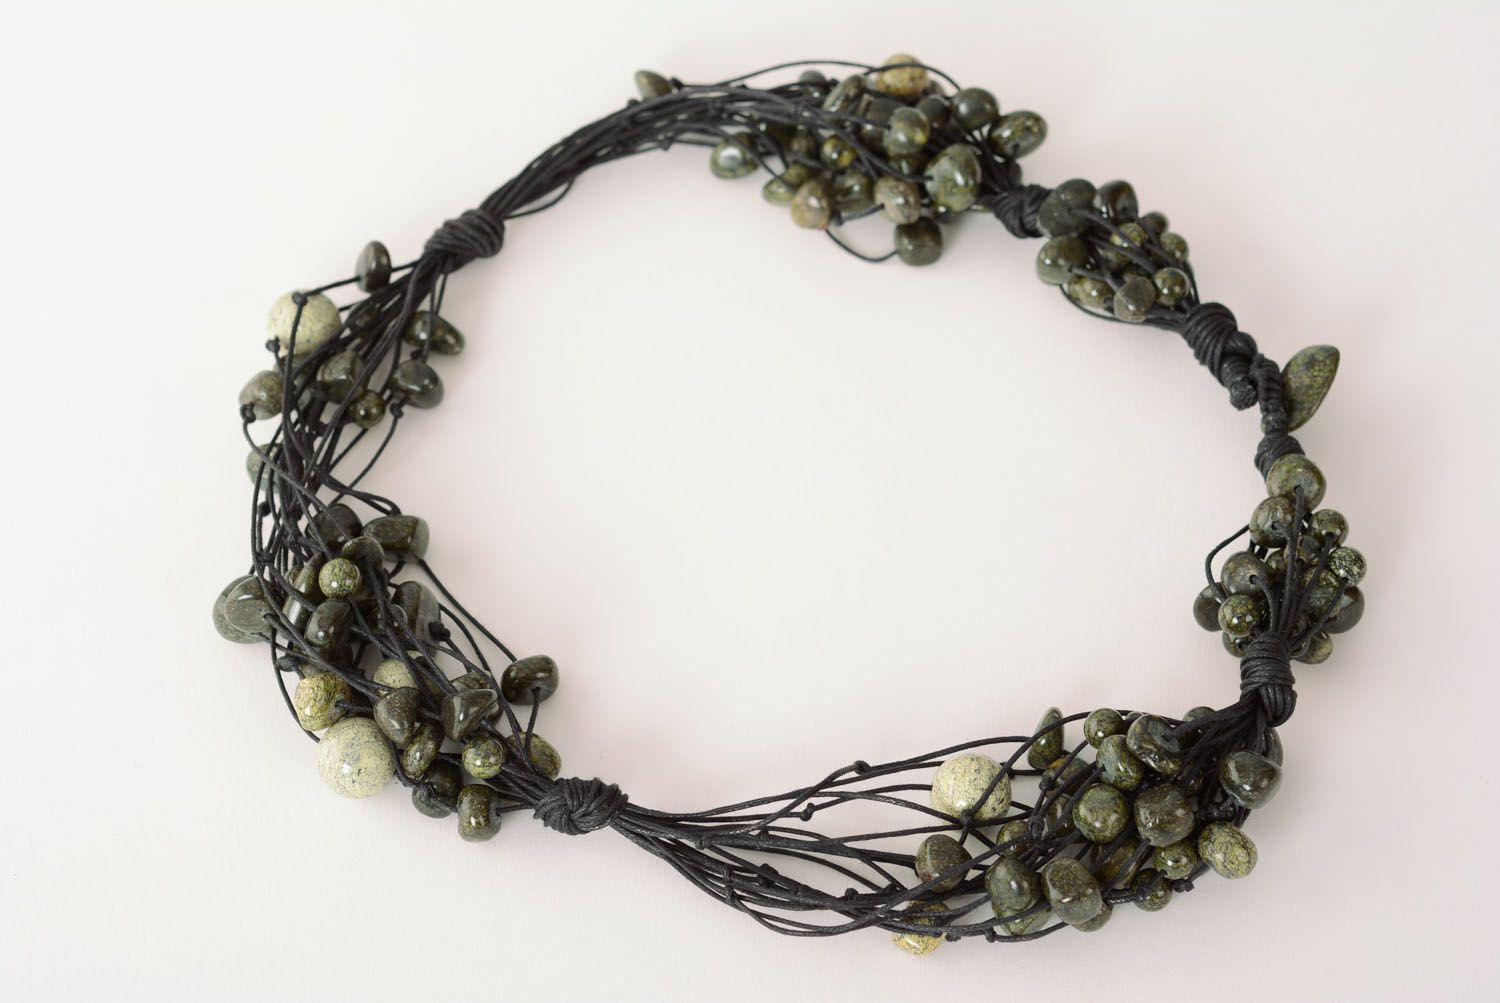 Necklace made of serpentine stone photo 3